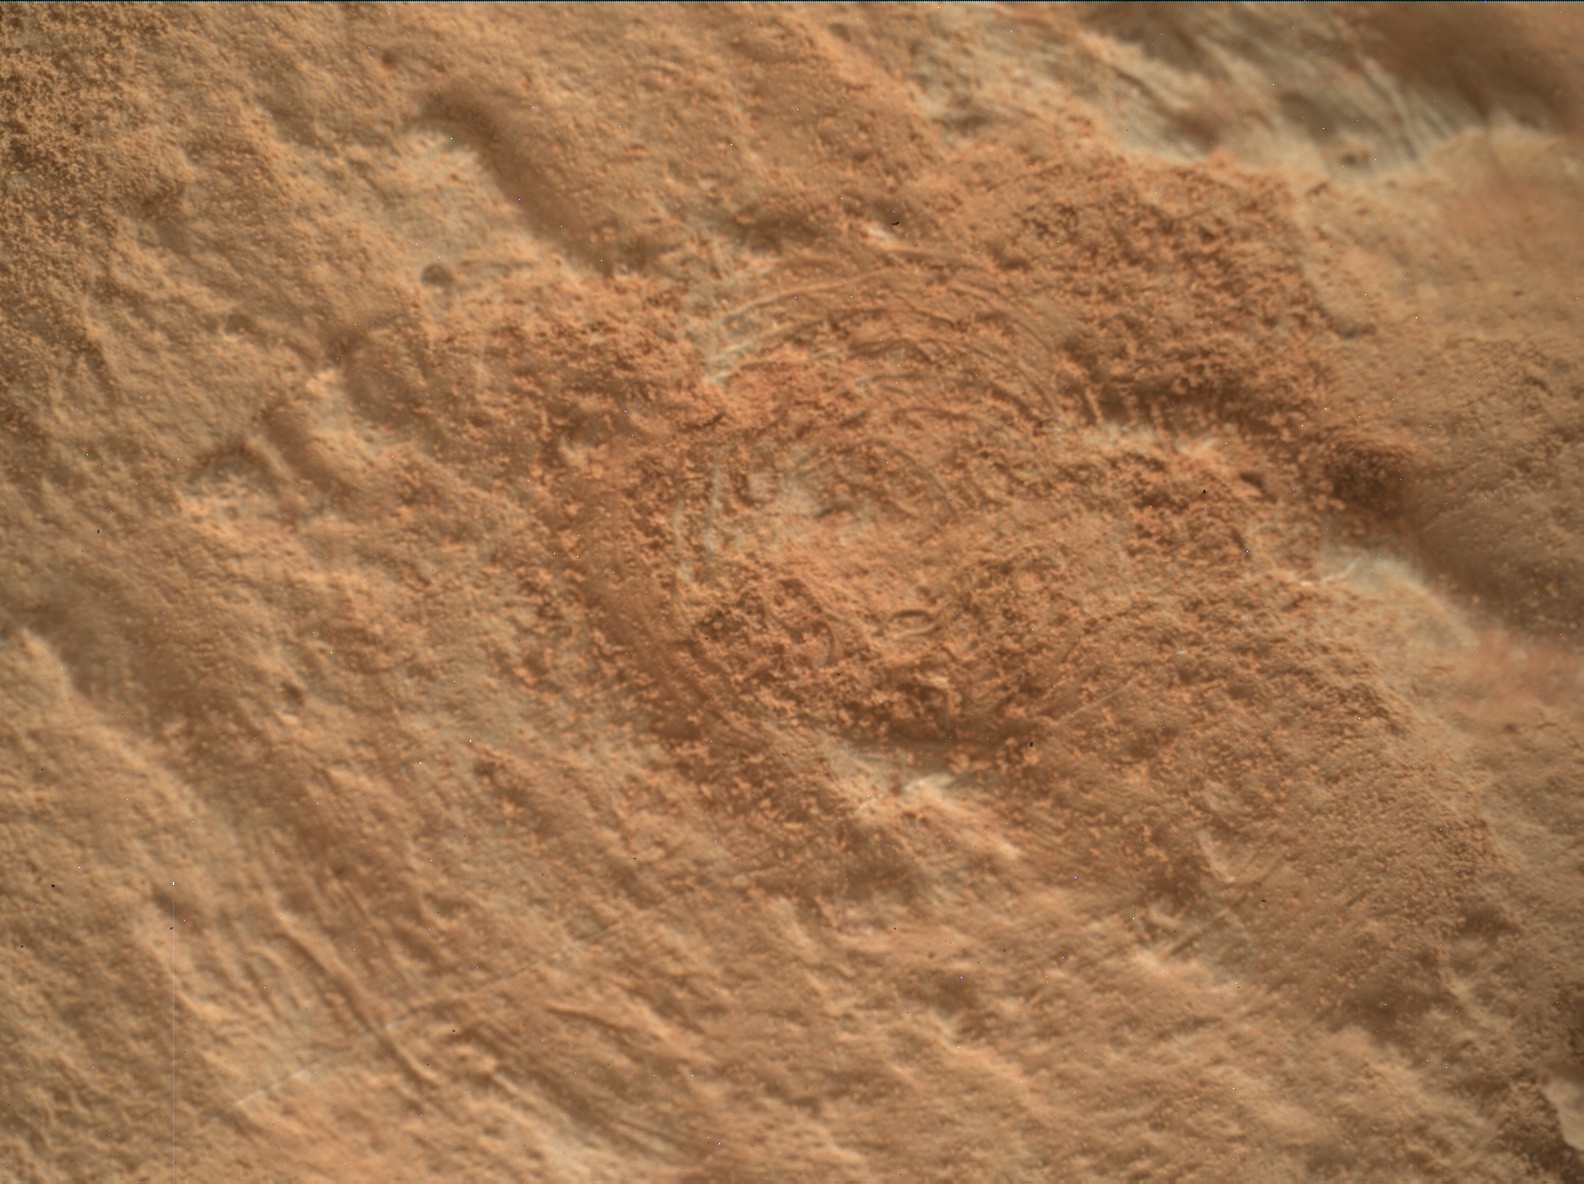 Nasa's Mars rover Curiosity acquired this image using its Mars Hand Lens Imager (MAHLI) on Sol 3187